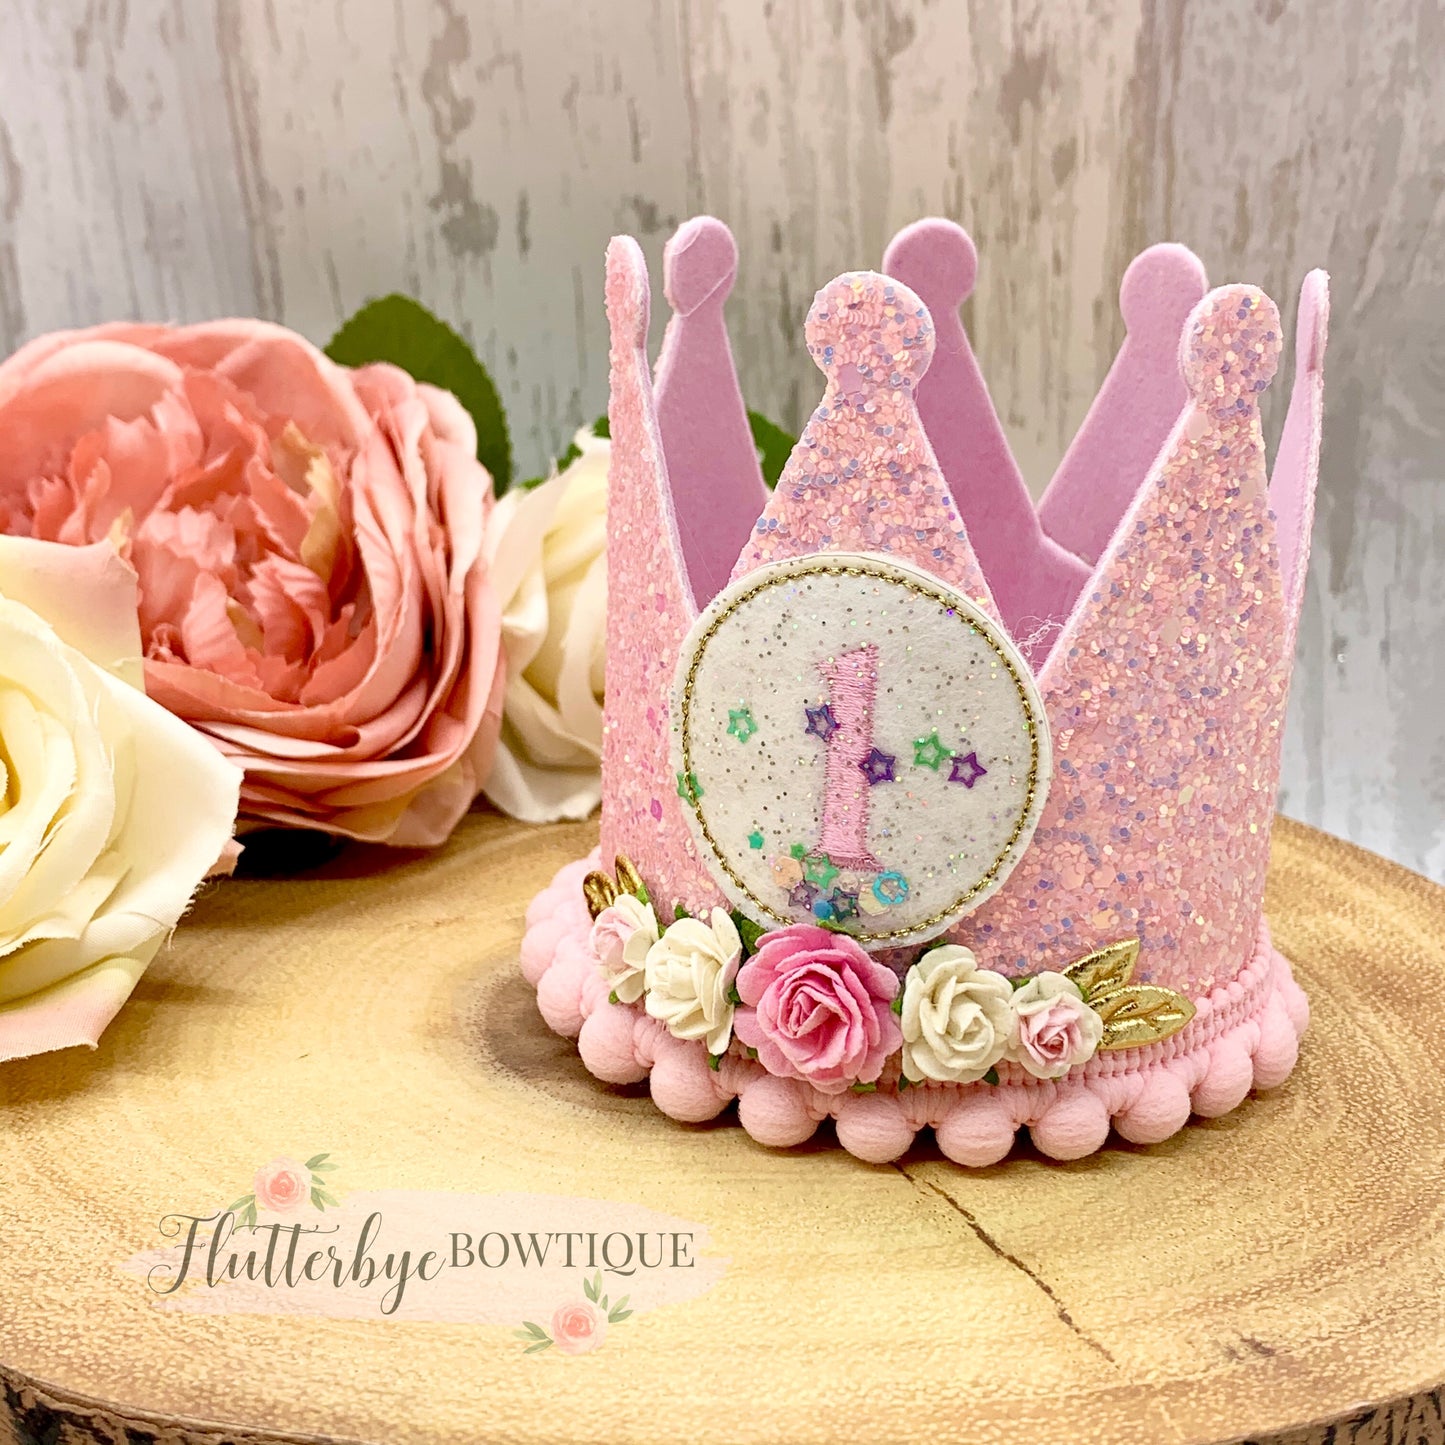 New Shaker Birthday Crown and Badge, Cake Smash Props - Flutterbye Bowtique